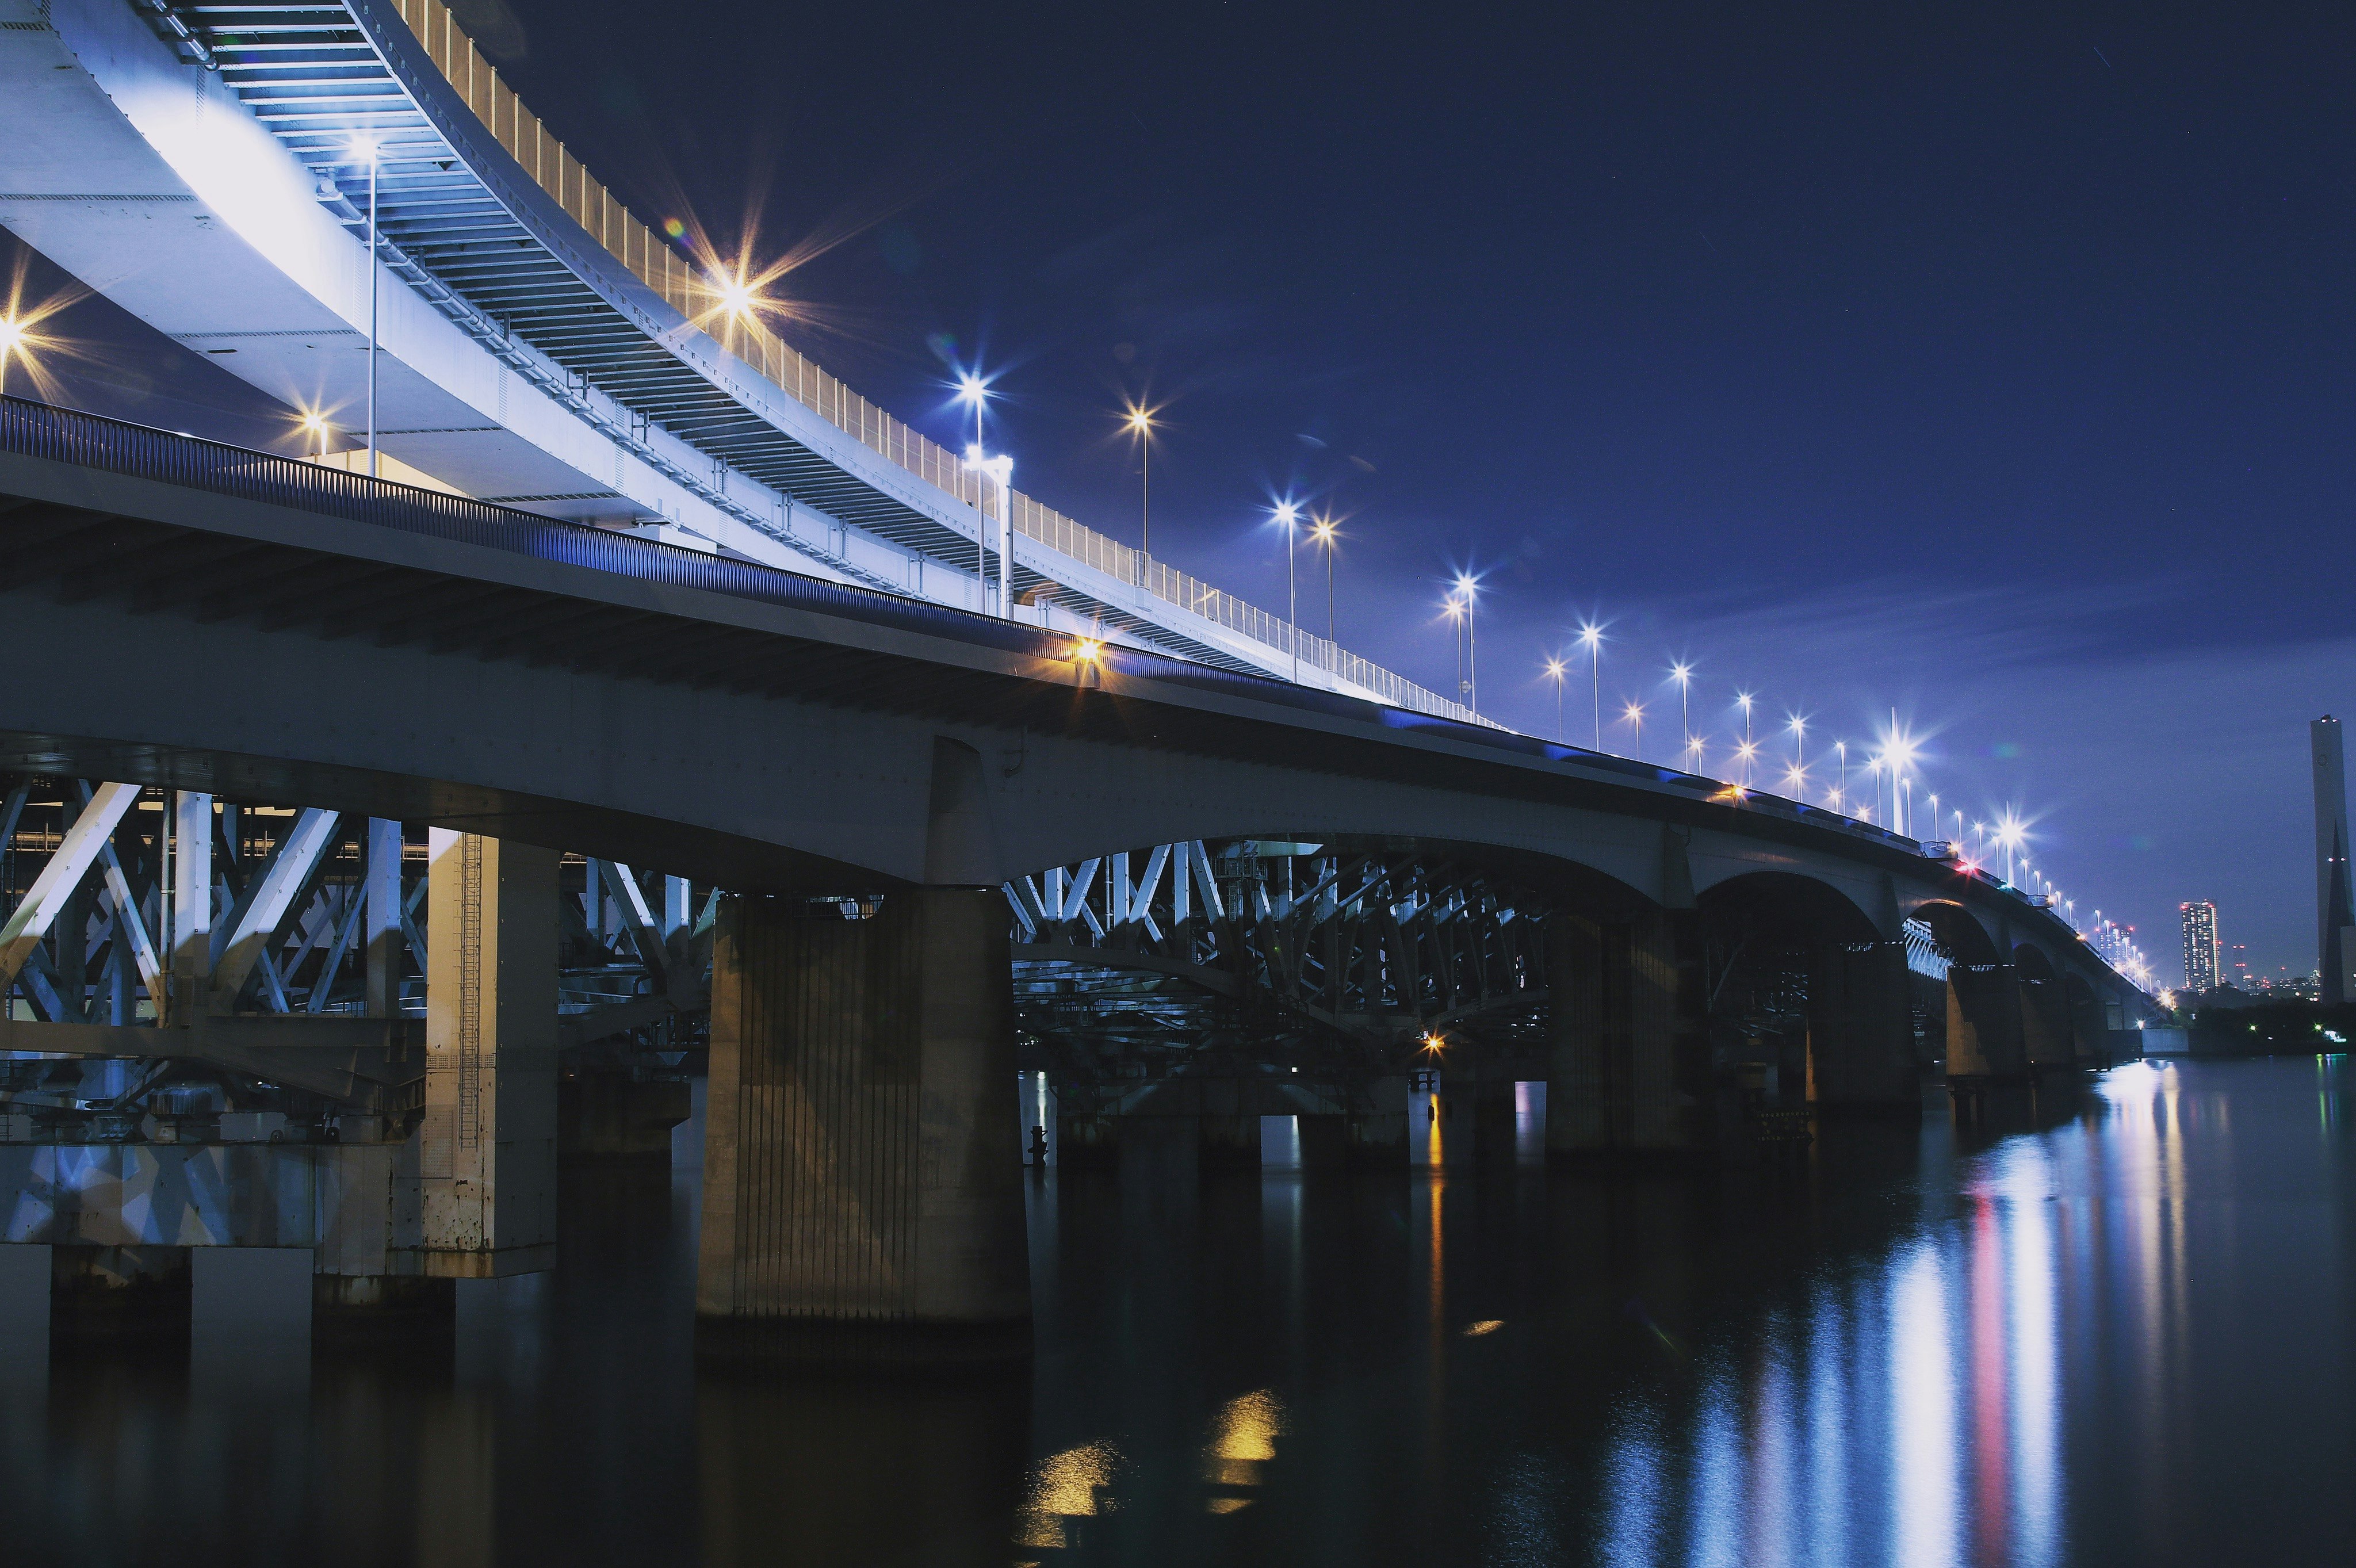 lighted bridge above calm body of water at night